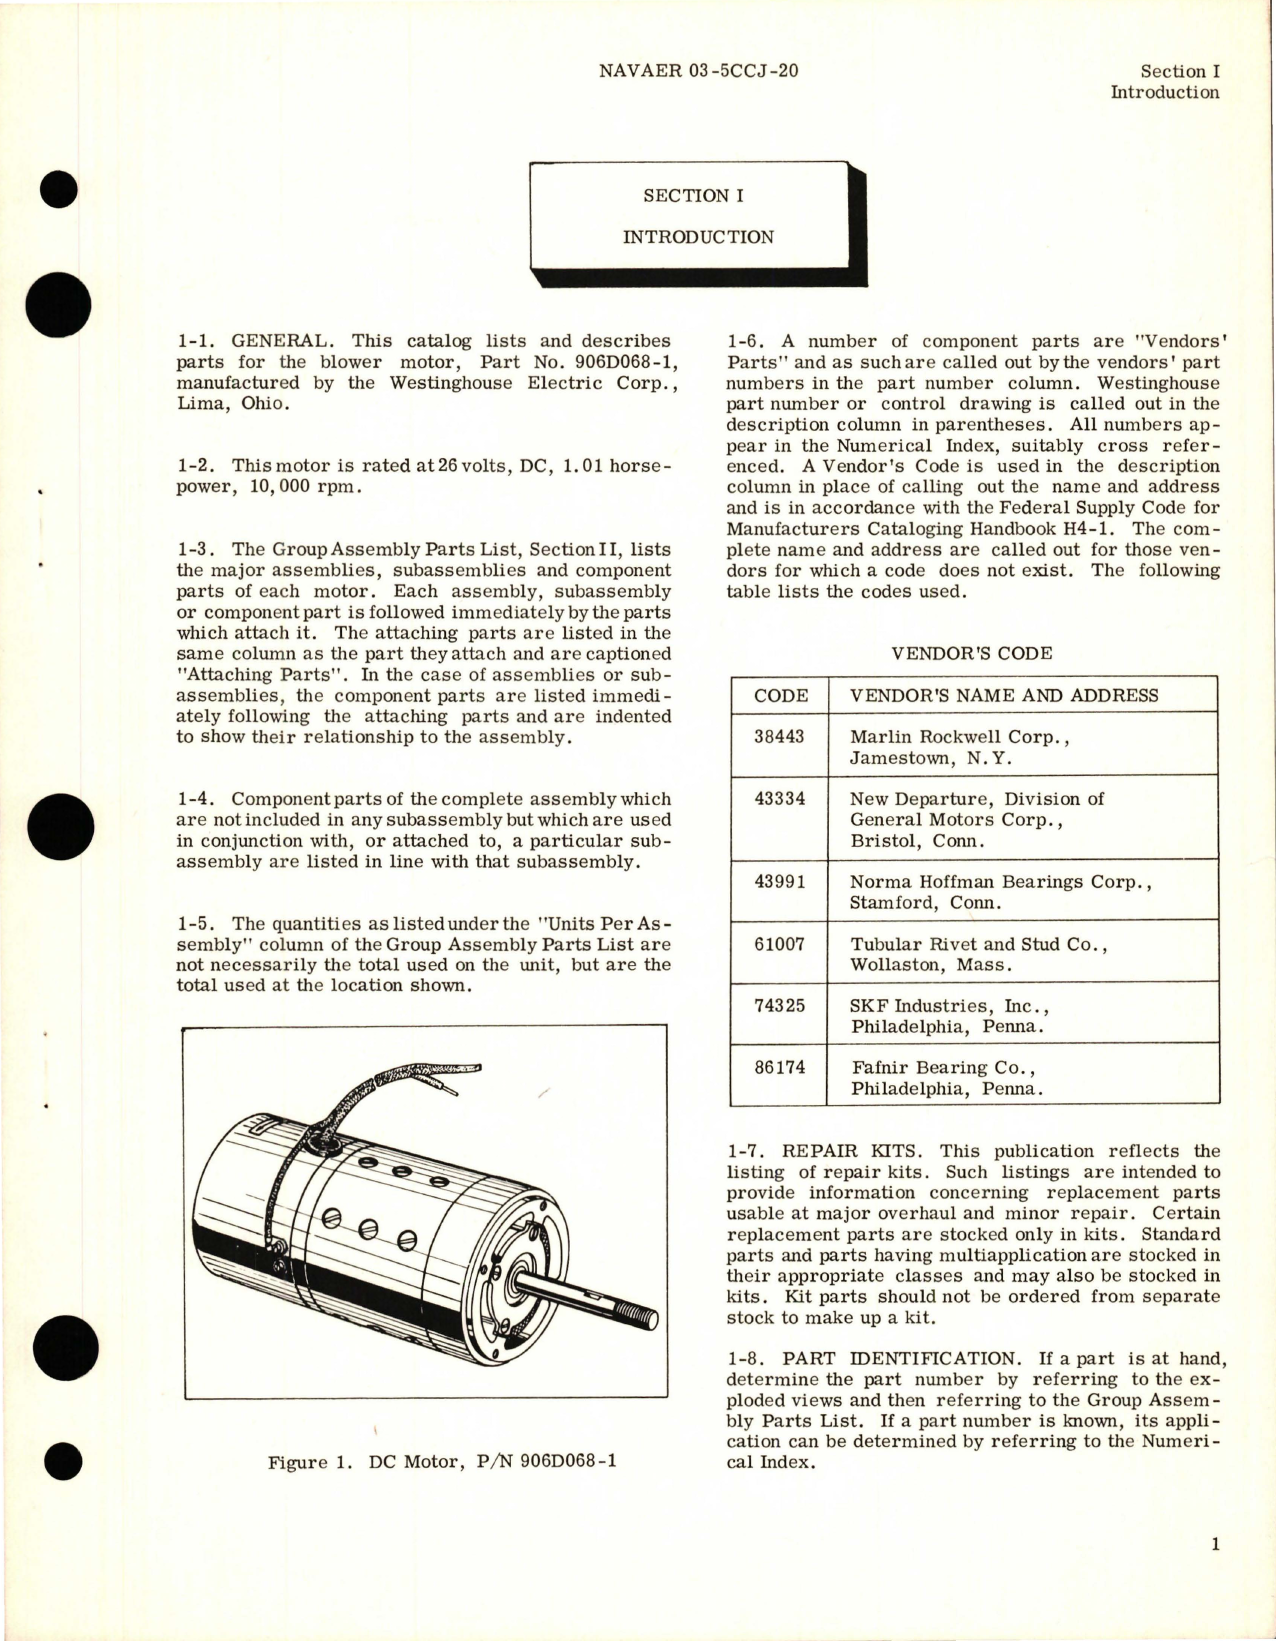 Sample page 5 from AirCorps Library document: Illustrated Parts Breakdown for DC Motor - Part 906D068-1